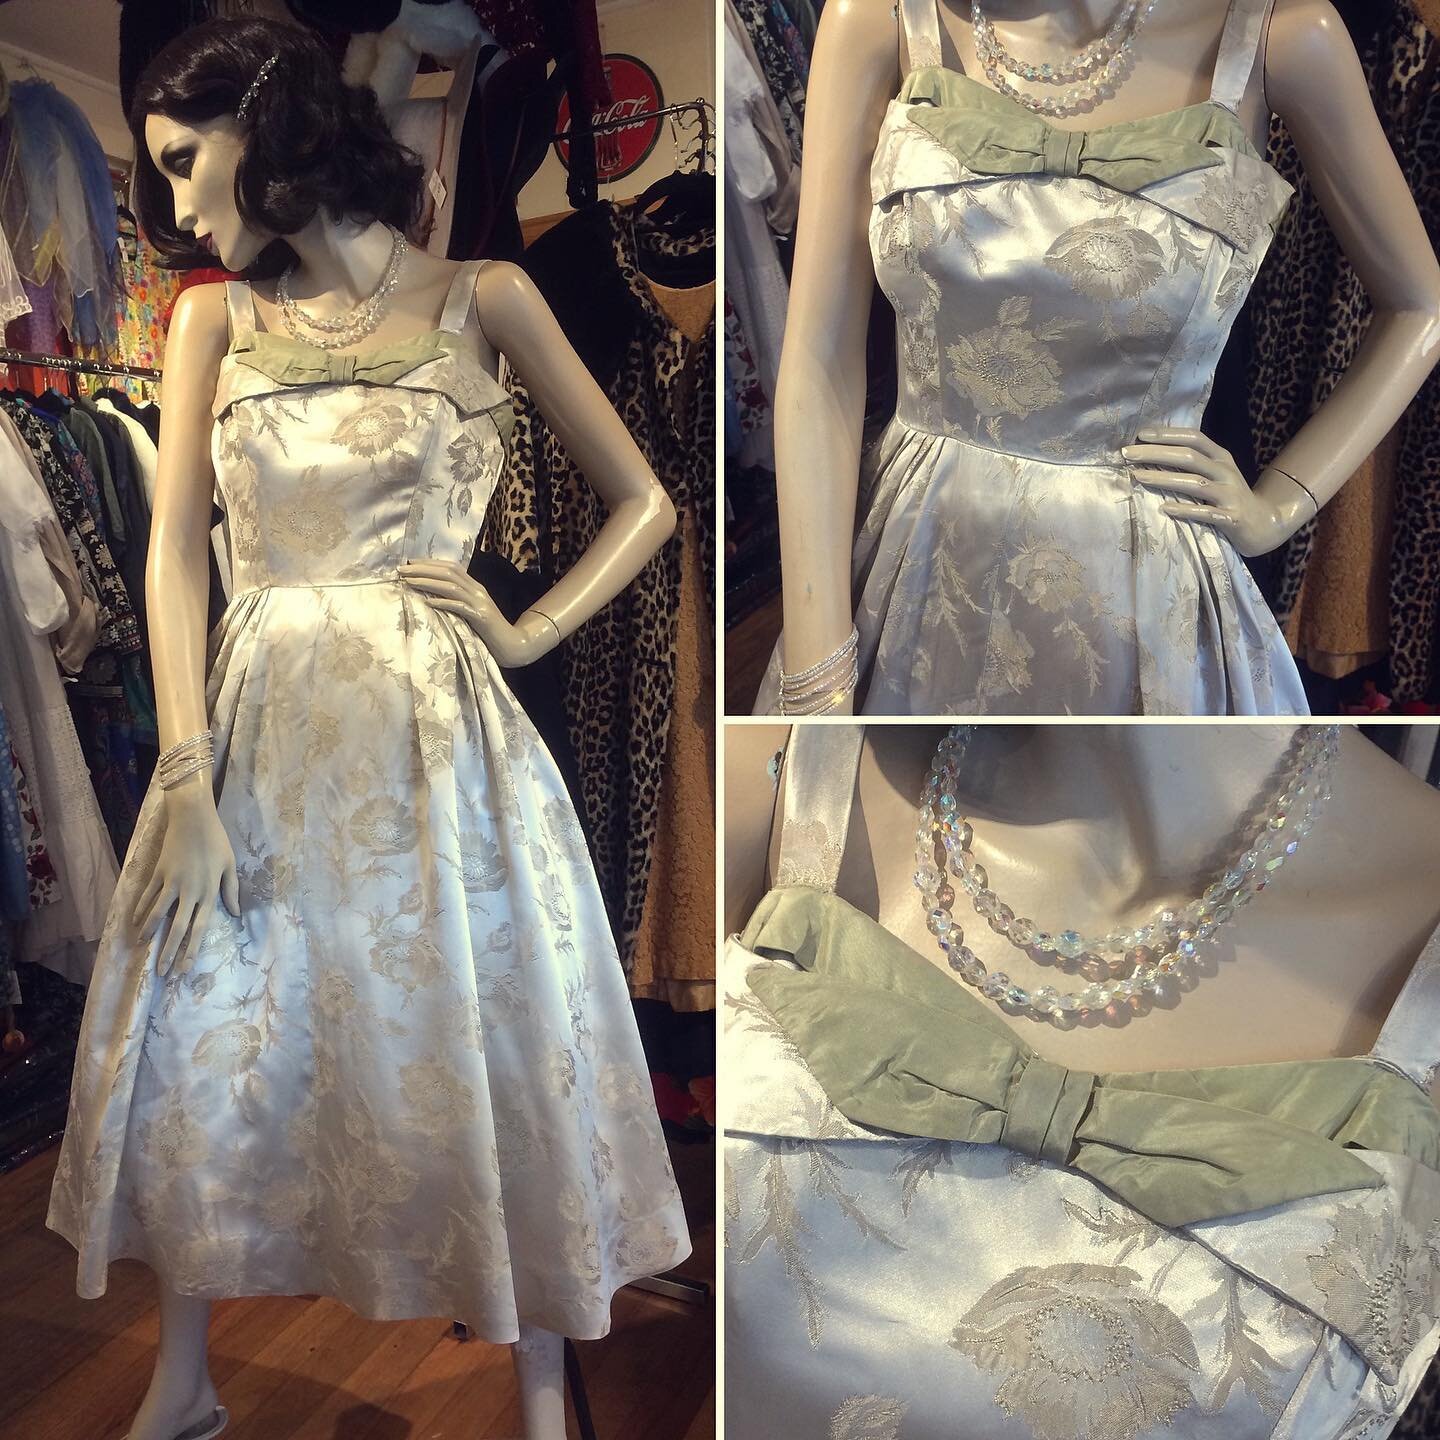 Stunning original 1950s satin jacquard dress with a gorgeous bow detail. Such a unique and soft colour. Small size 8.
Available in store at our Leura Shop 😁

#vintage #1950s #1950sfashion #truevintage #vintagedress #leura #leuravintage